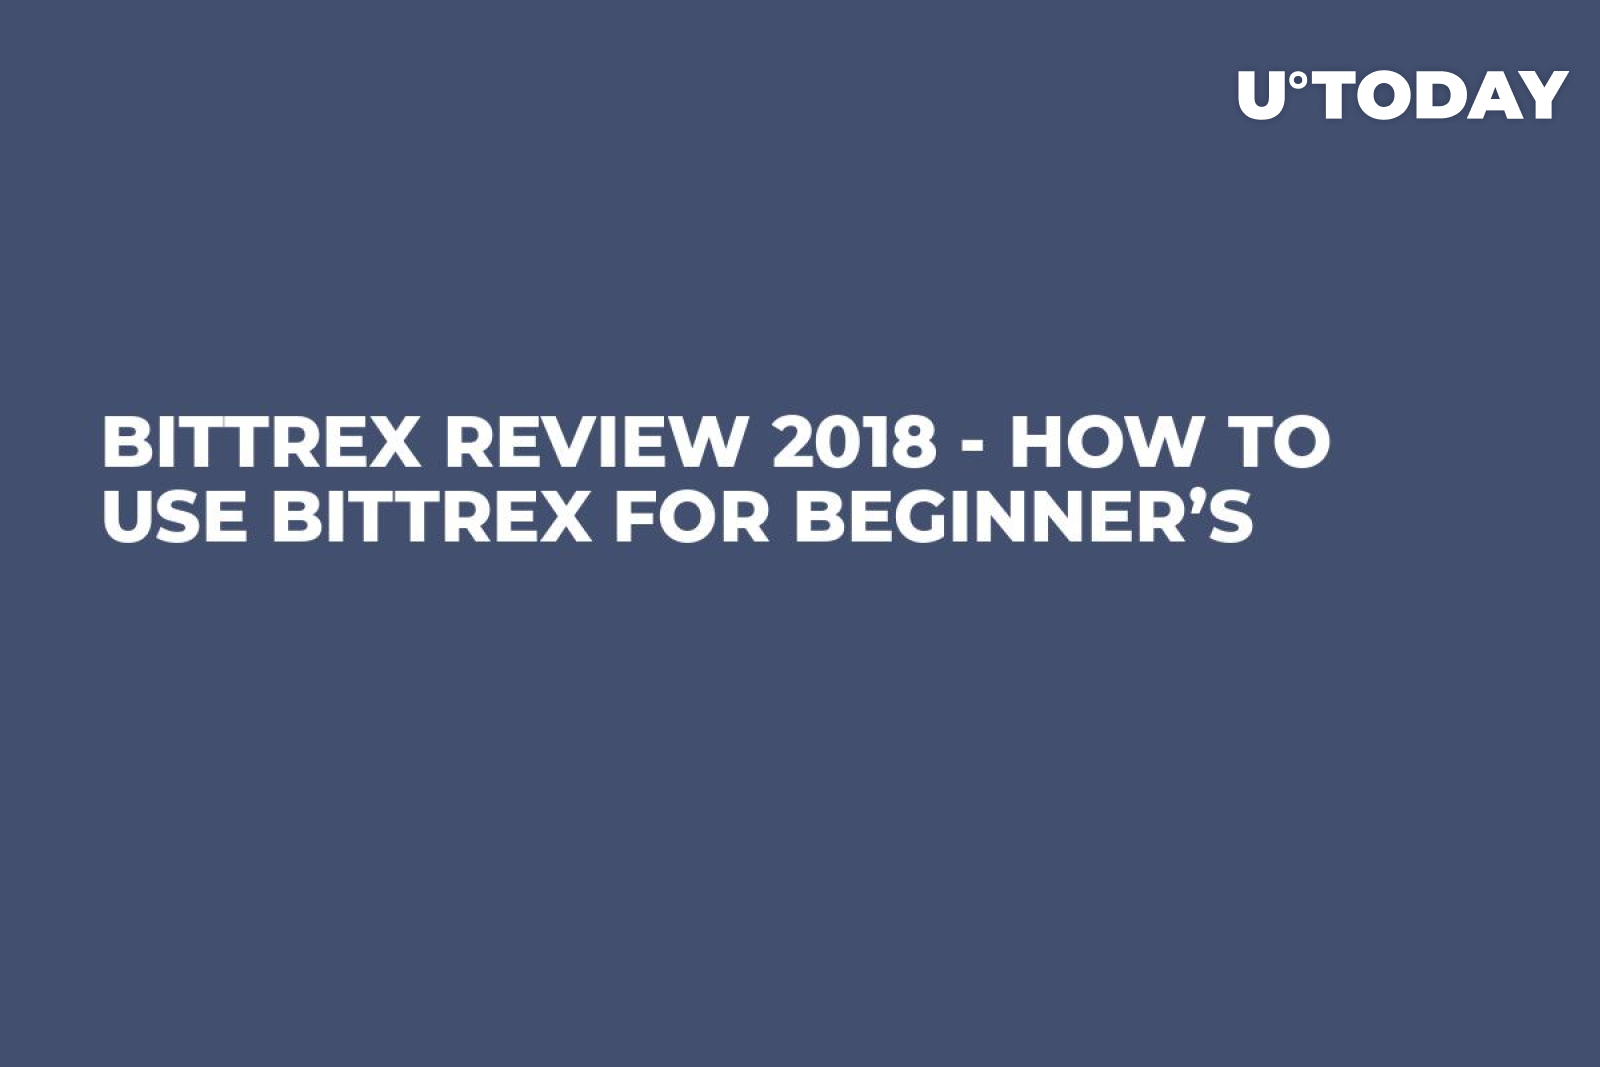 Bittrex Review 2018 - How to Use Bittrex for Beginner's 